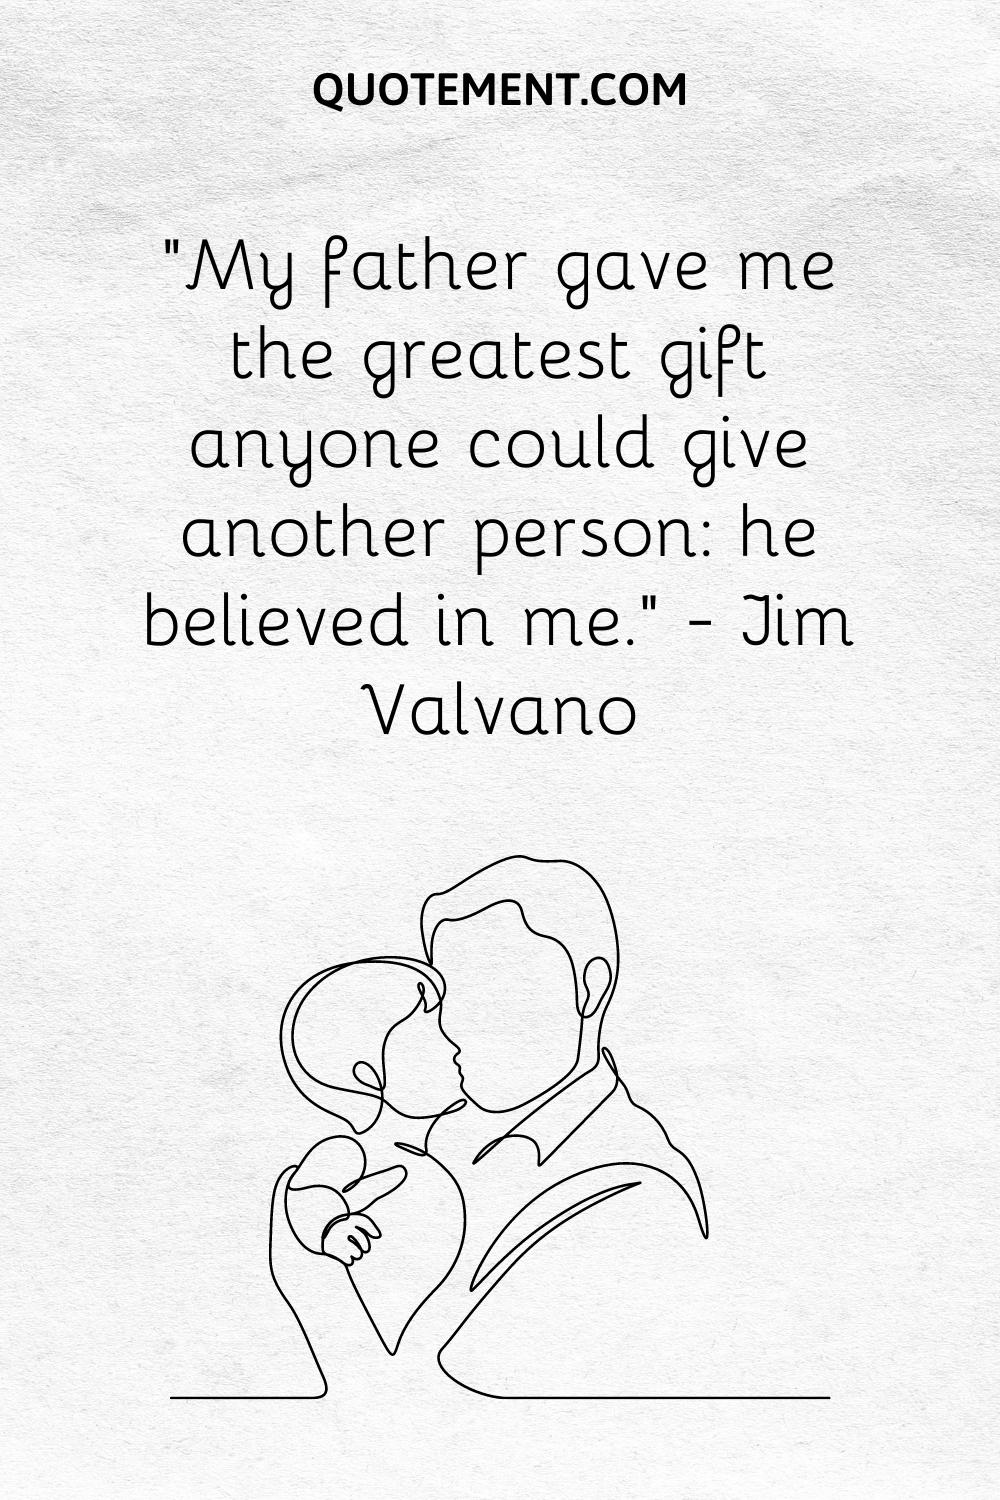 “My father gave me the greatest gift anyone could give another person he believed in me.” — Jim Valvano